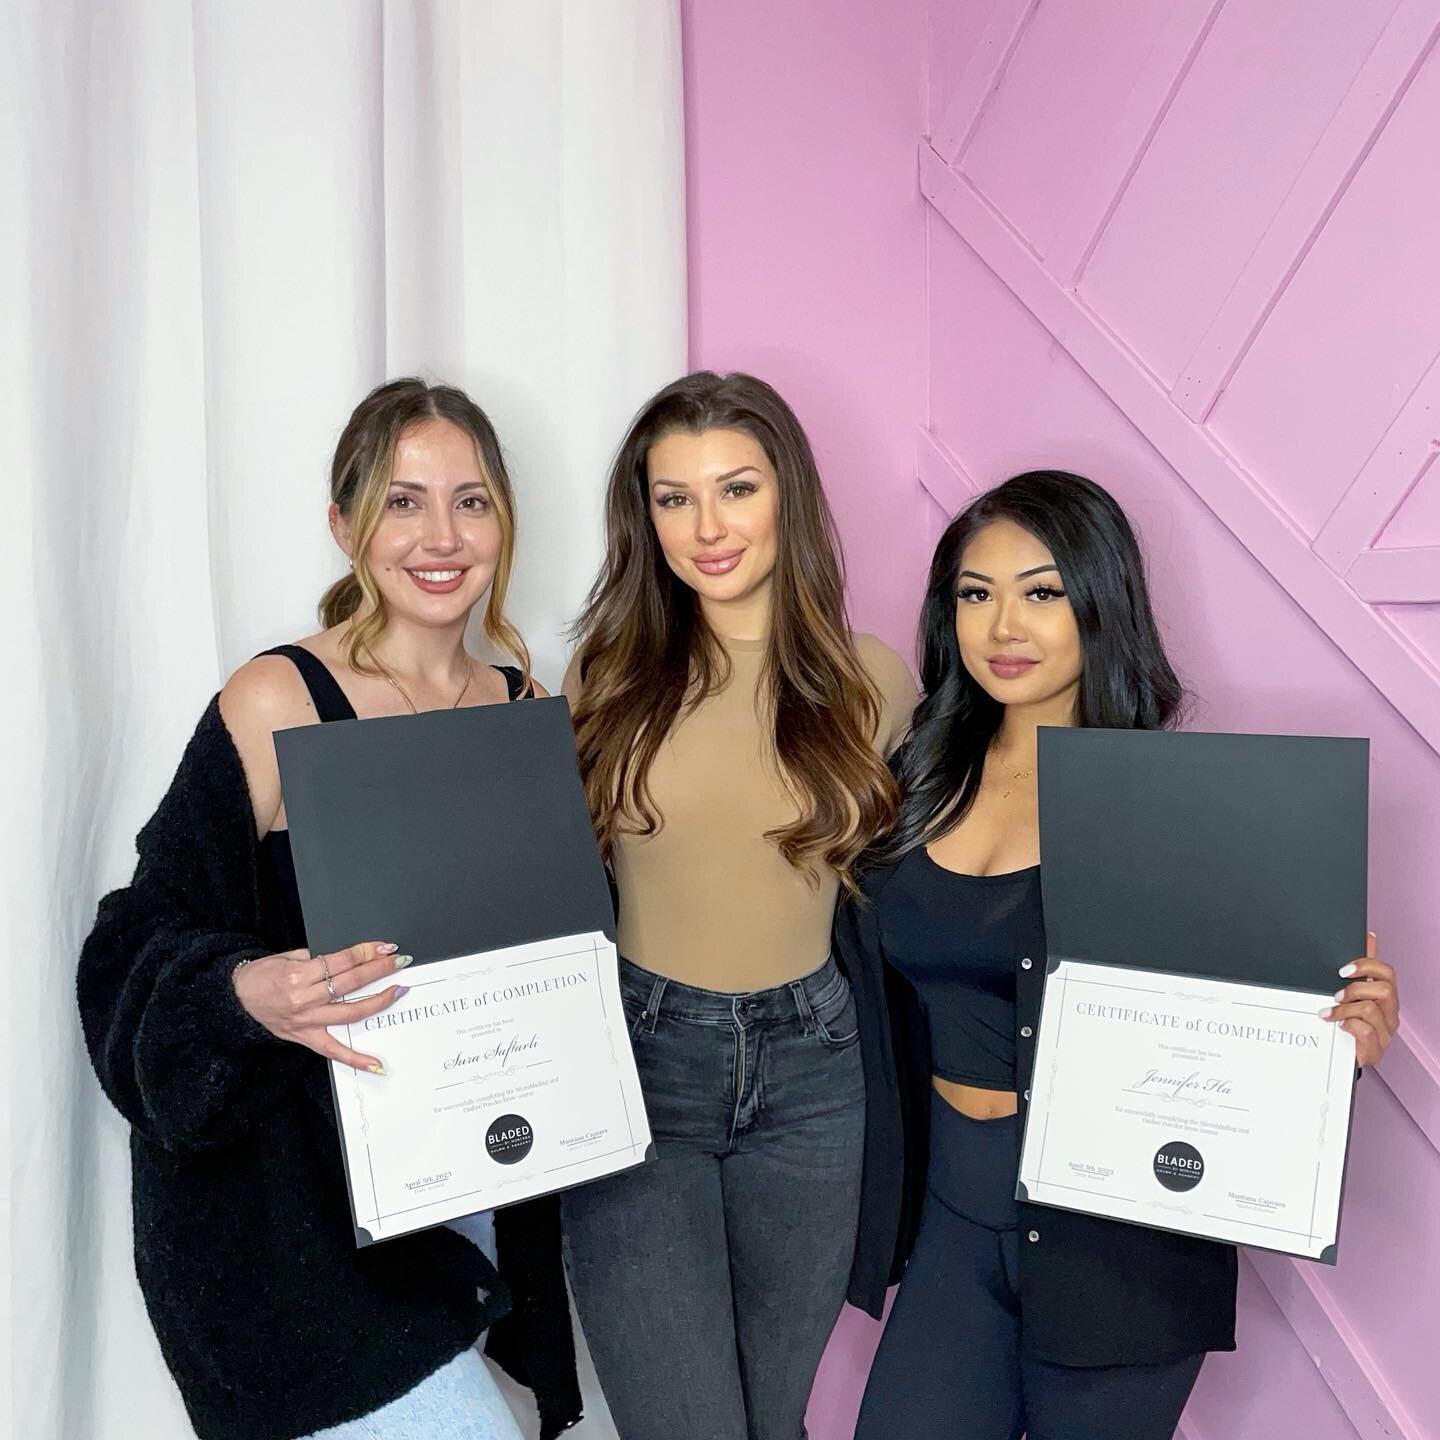 Congratulations to these 2 ladies on successfully completing the Microblading and Ombr&eacute; powder brow course!🥂
So incredibly proud of them! Welcoming 2 new passionate and driven artists into this amazing industry 🤍 

👉🏼𝐏𝐑𝐈𝐕𝐀𝐓𝐄 𝟏:𝟏 ?